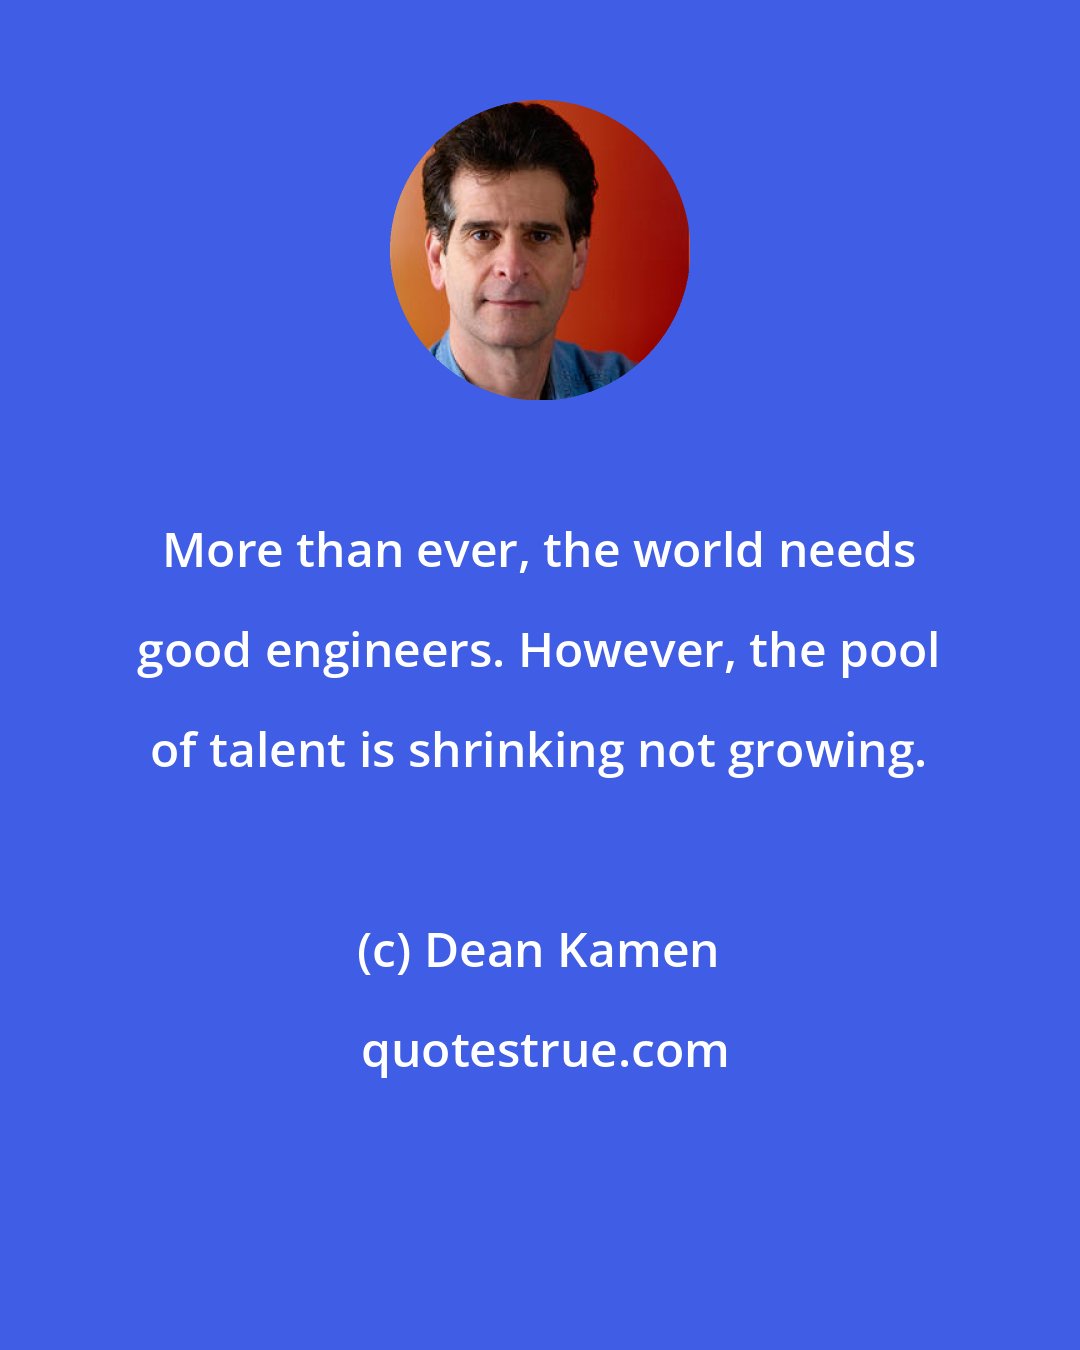 Dean Kamen: More than ever, the world needs good engineers. However, the pool of talent is shrinking not growing.